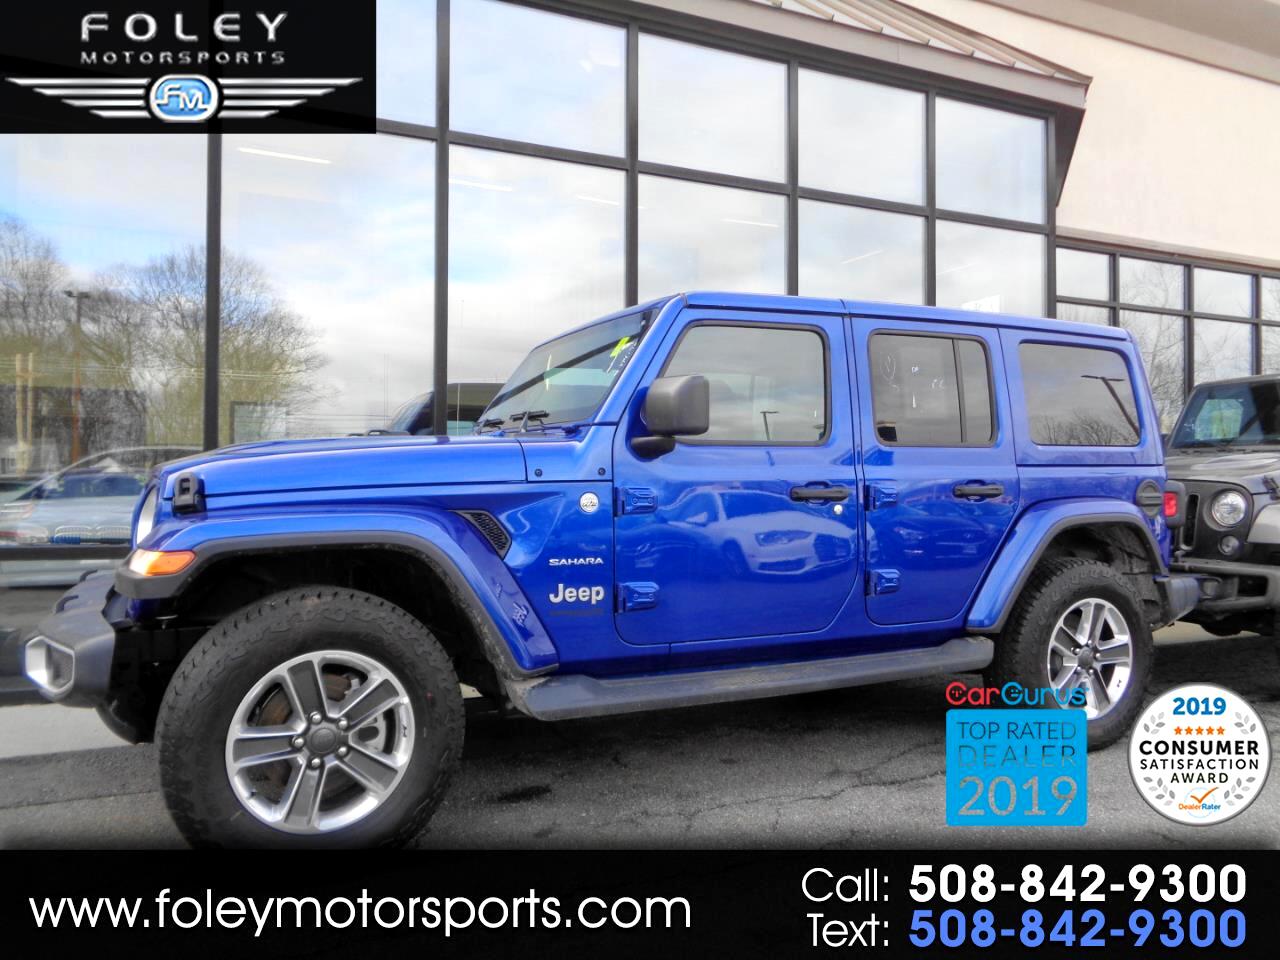 Used 2019 Jeep Wrangler Unlimited Sold in Shrewsbury MA 01545 Foley  Motorsports